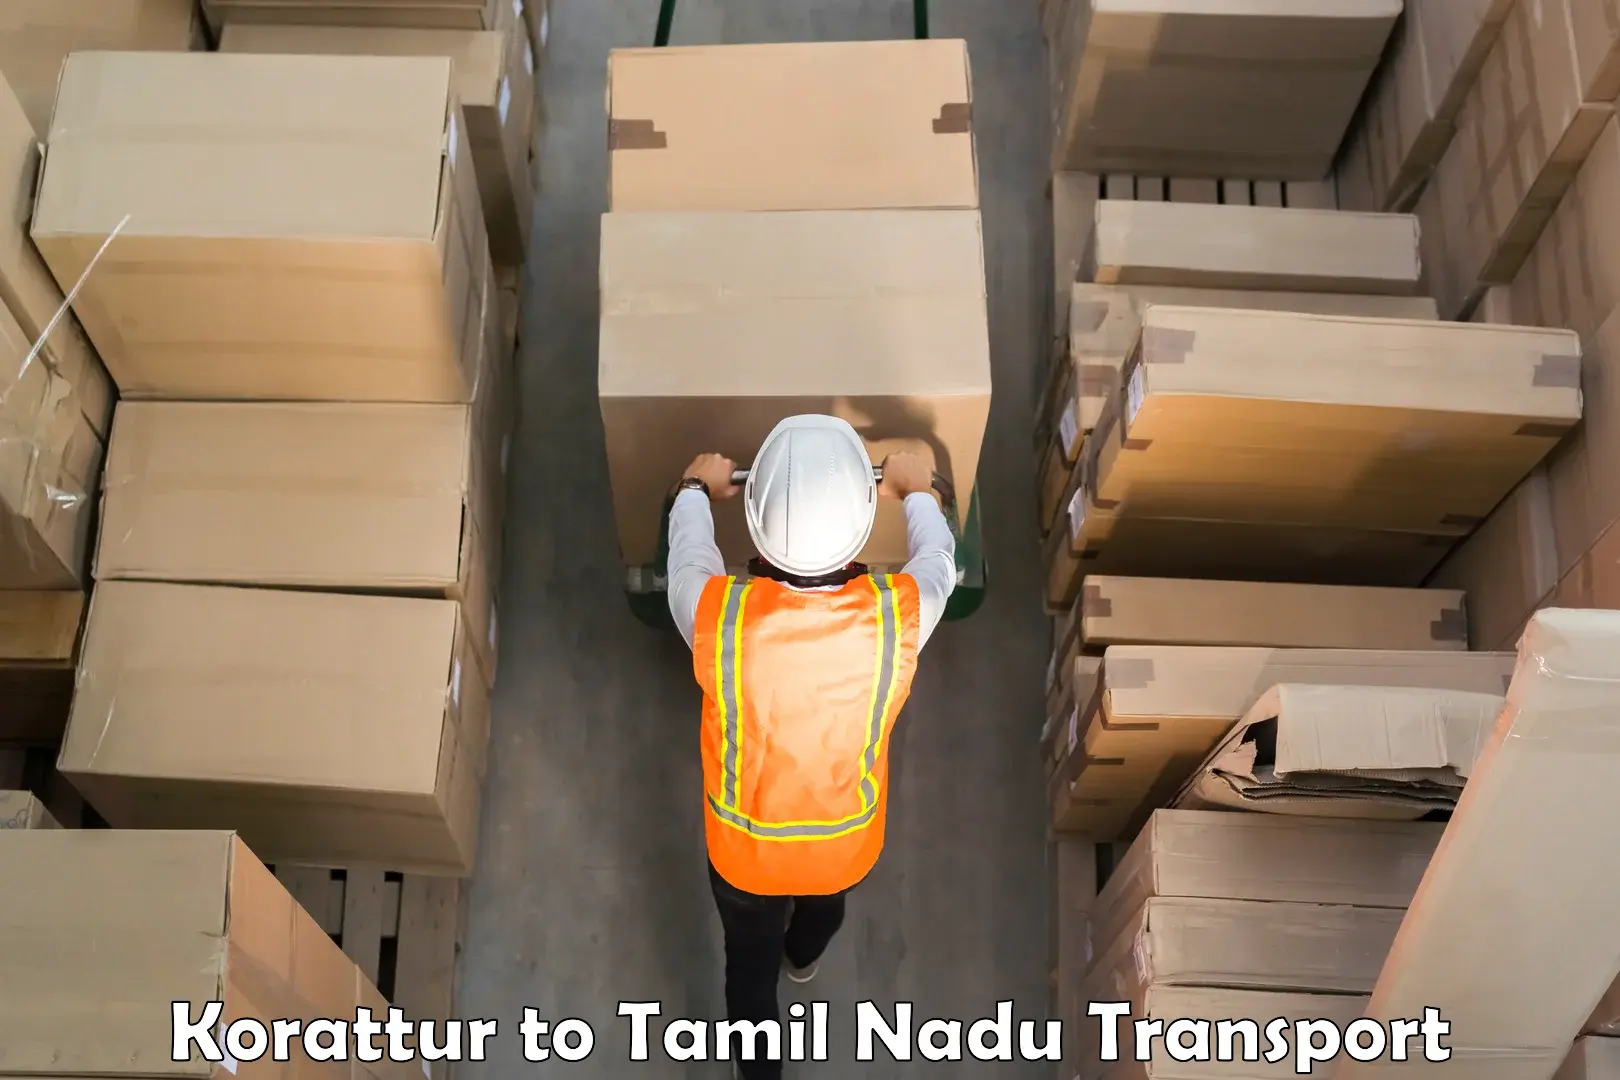 Parcel transport services Korattur to Sri Ramachandra Institute of Higher Education and Research Chennai